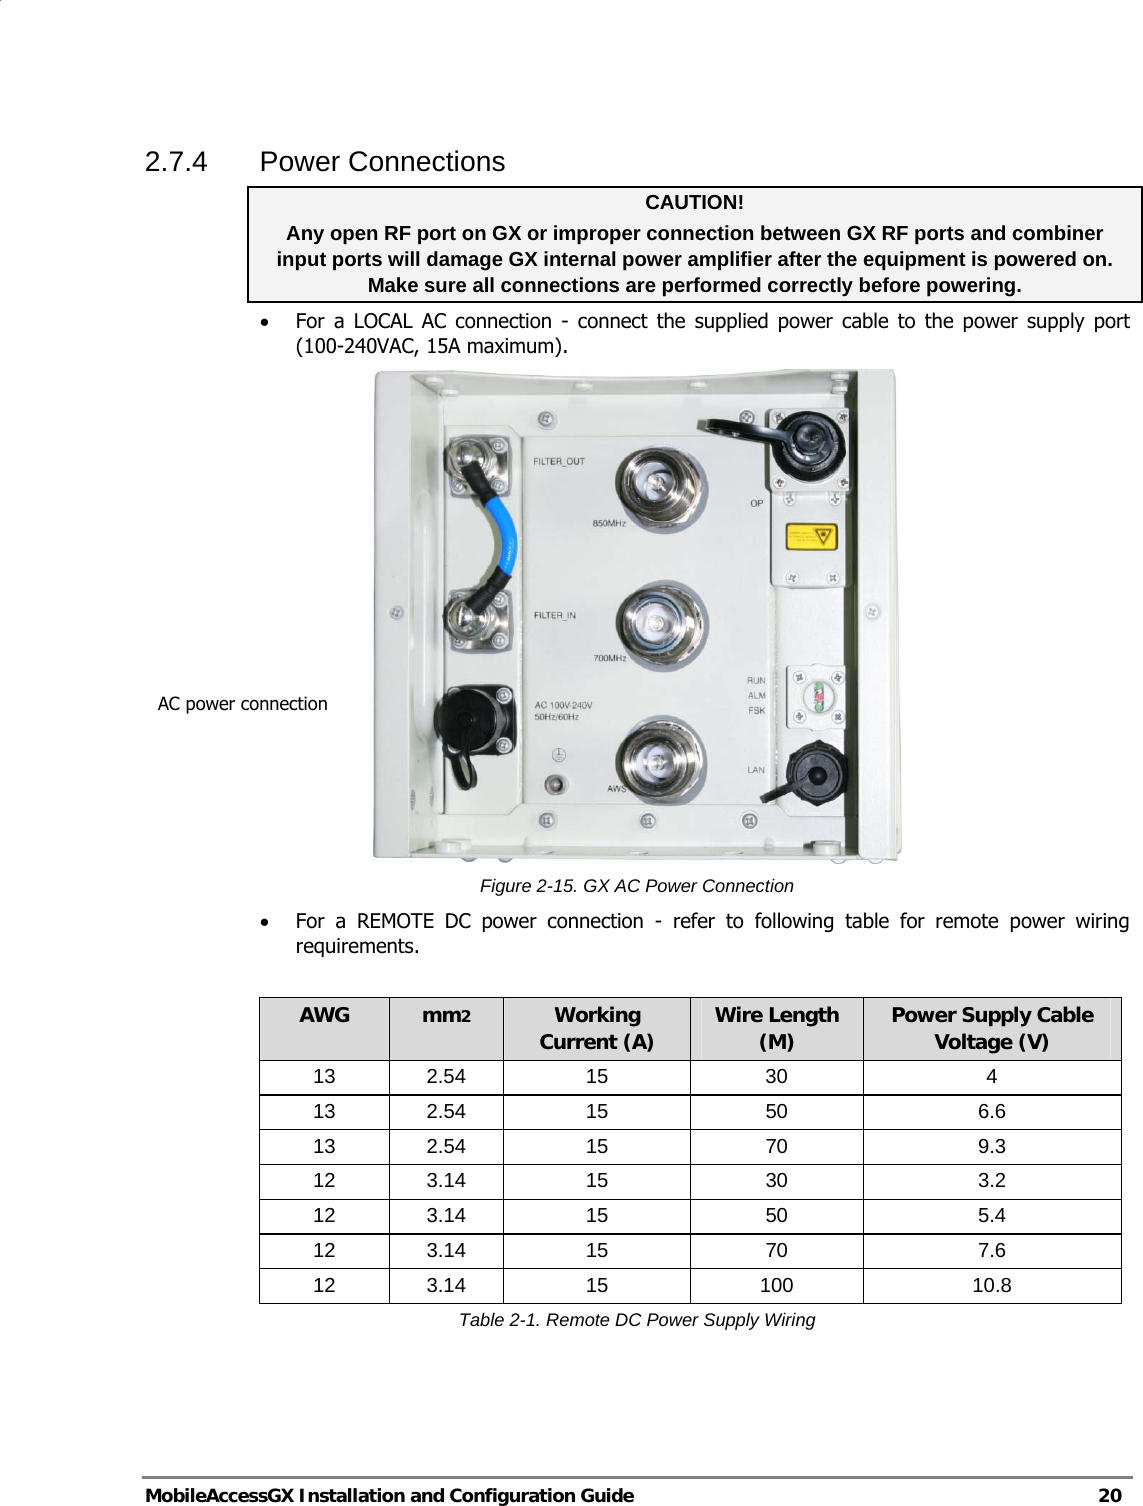   MobileAccessGX Installation and Configuration Guide   20  2.7.4 Power Connections CAUTION!   Any open RF port on GX or improper connection between GX RF ports and combiner input ports will damage GX internal power amplifier after the equipment is powered on. Make sure all connections are performed correctly before powering. • For a LOCAL AC connection - connect the supplied power cable to the power supply port (100-240VAC, 15A maximum).  Figure 2-15. GX AC Power Connection • For a REMOTE DC power connection - refer to following table for remote power wiring requirements.   AWG  mm2 Working Current (A)  Wire Length (M)  Power Supply Cable Voltage (V) 13 2.54  15  30  4 13 2.54  15  50  6.6 13 2.54  15  70  9.3 12 3.14  15  30  3.2 12 3.14  15  50  5.4 12 3.14  15  70  7.6 12 3.14  15  100  10.8 Table 2-1. Remote DC Power Supply Wiring  AC power connection 